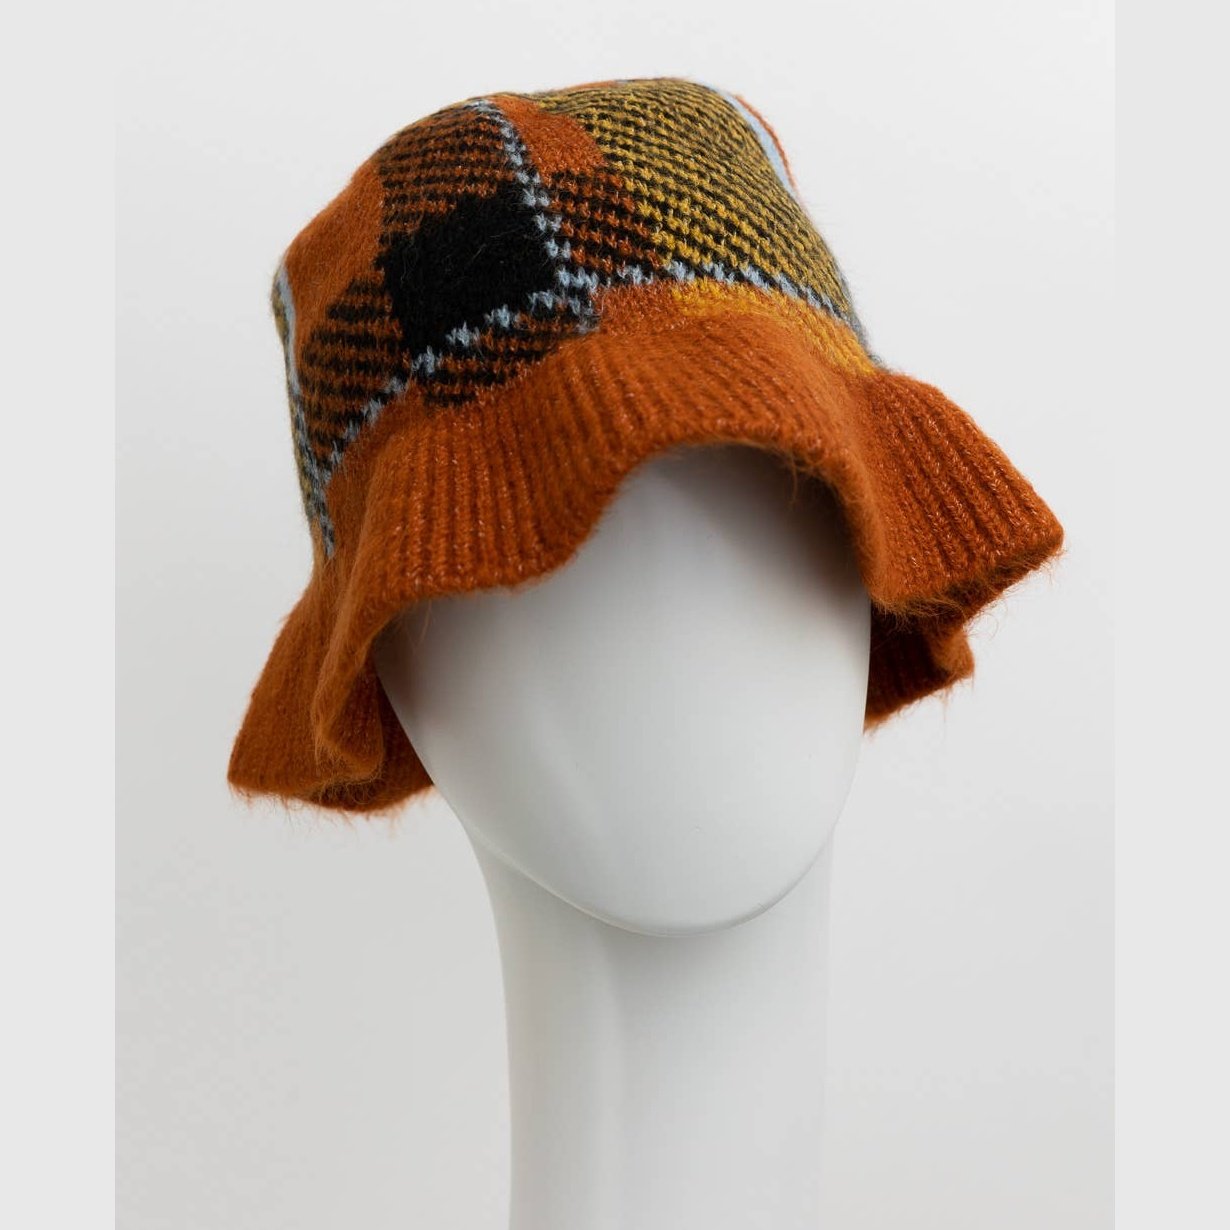 Plaid Patterned Bucket Hat Style Beanie